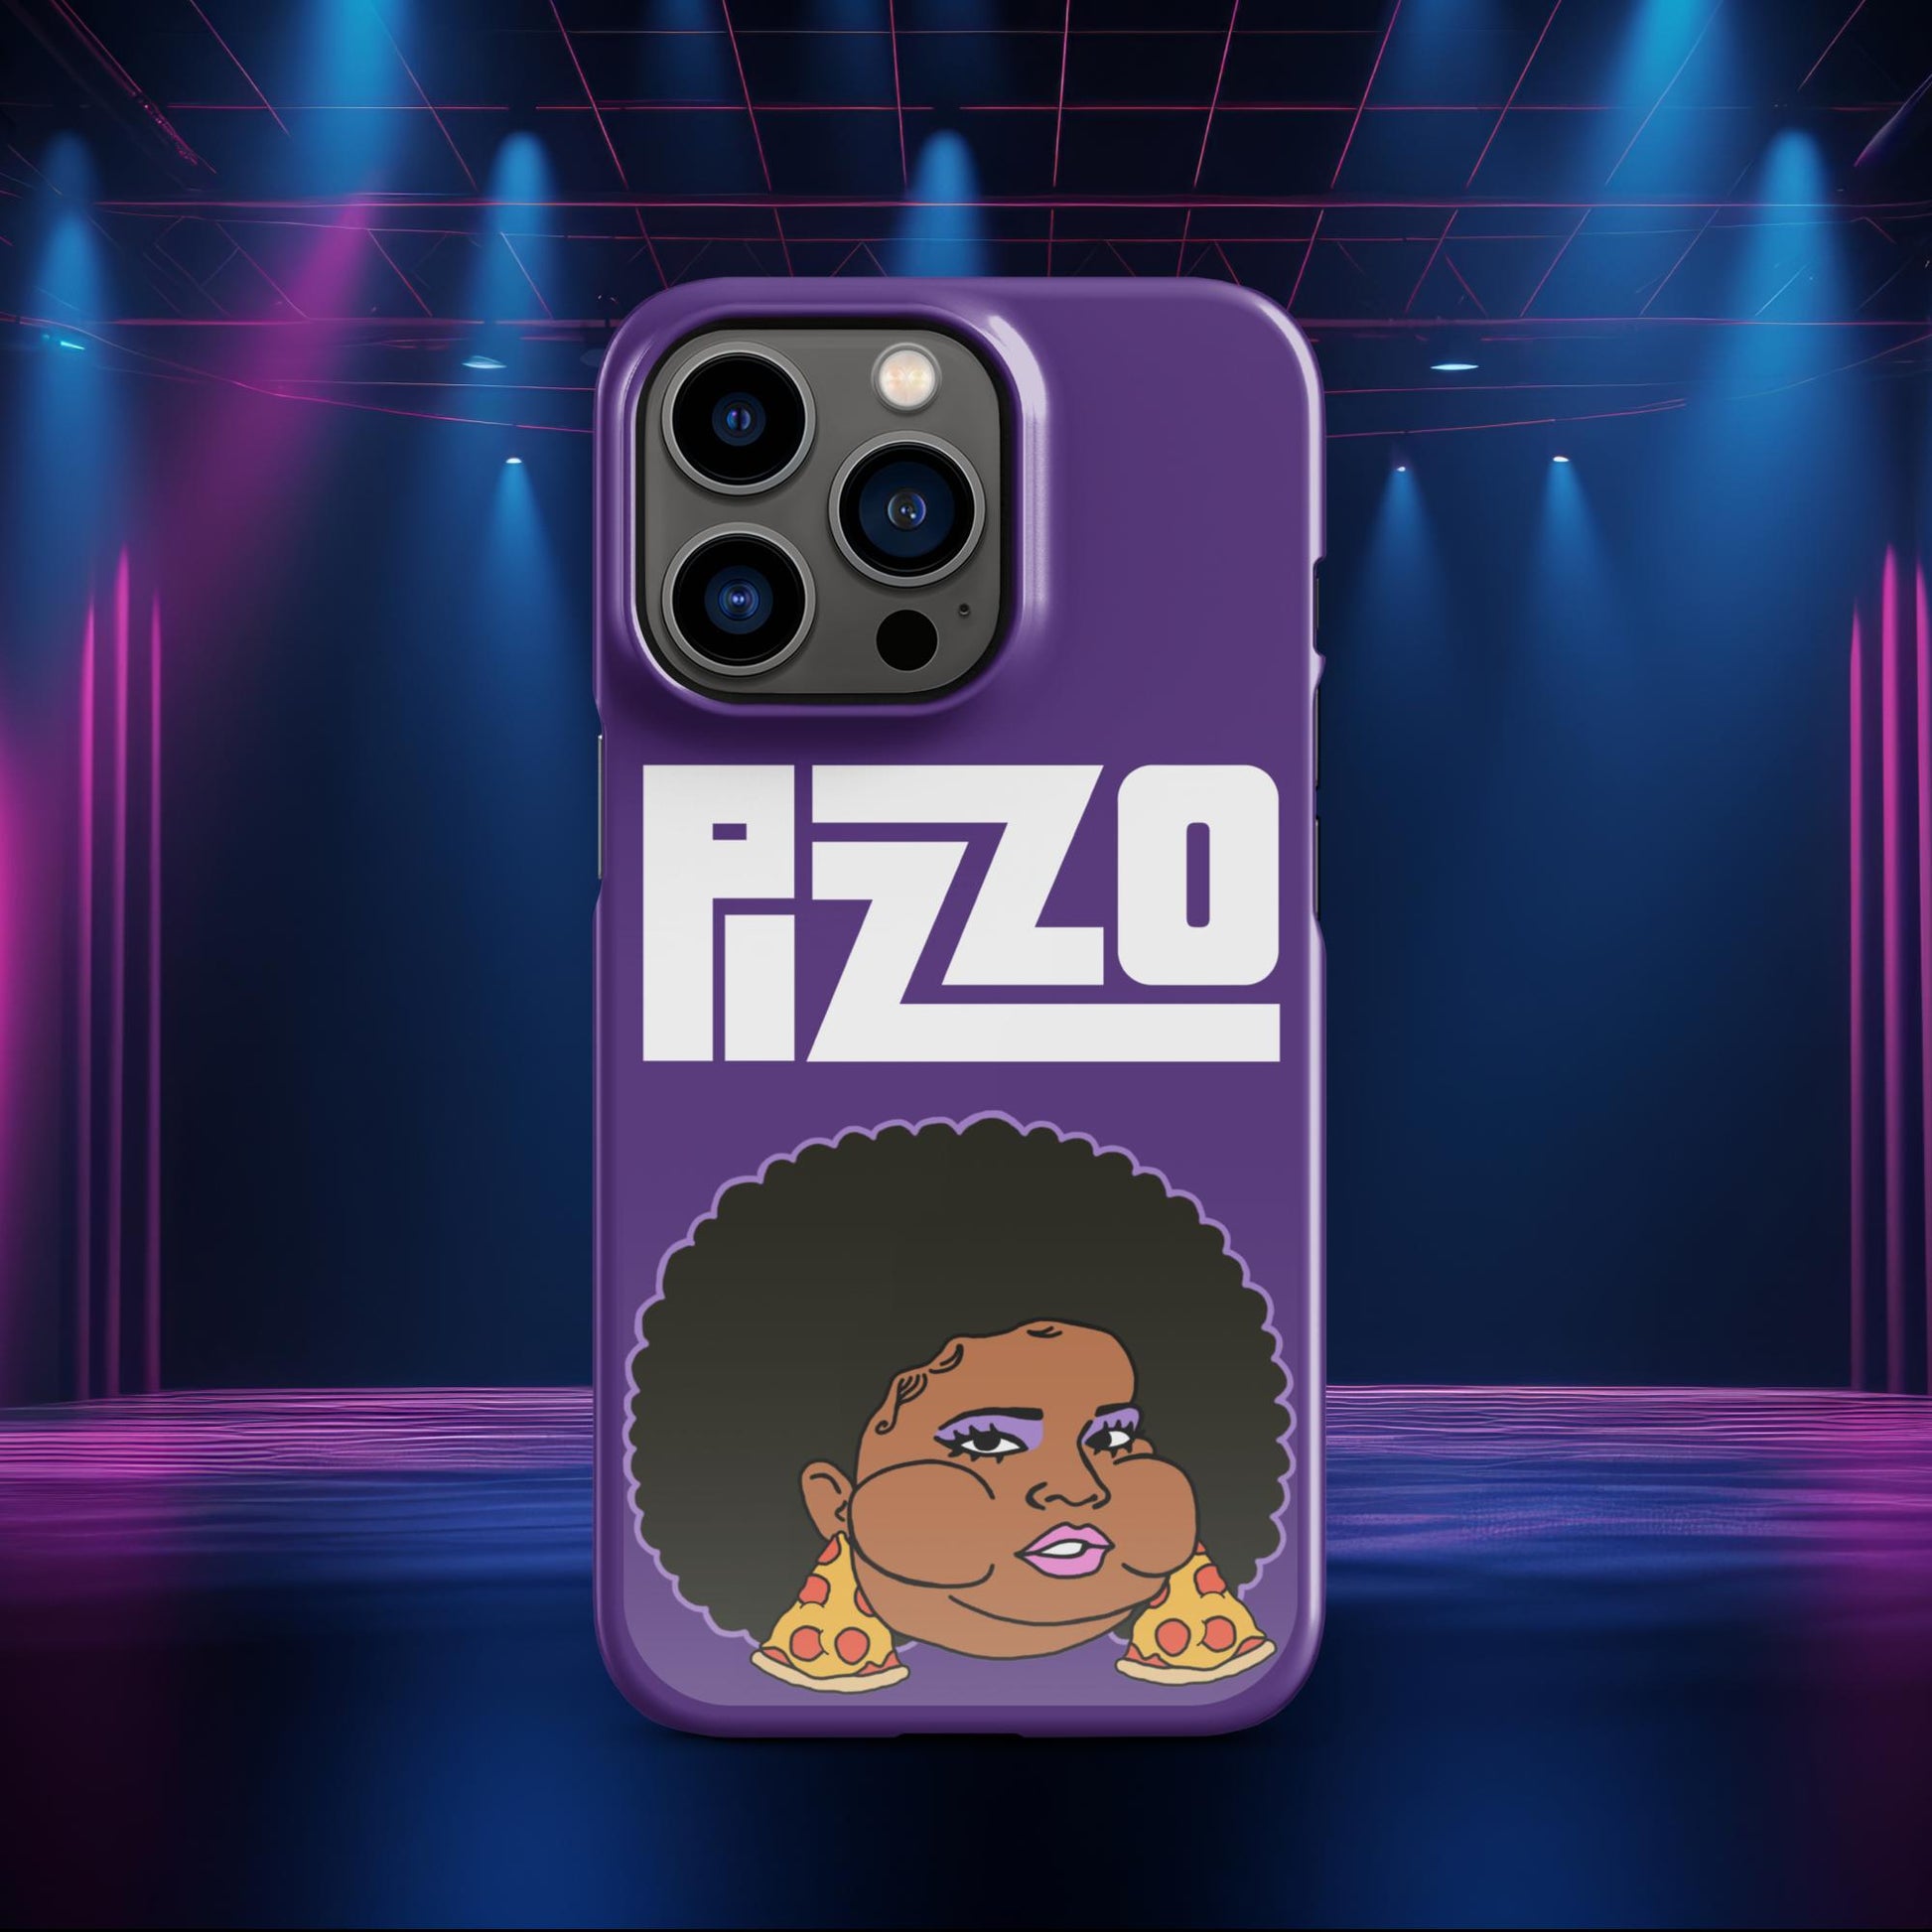 Pizzo Lizzo Pizza Lizzo Merch Lizzo Gift Song Lyrics Lizzo Snap case for iPhone Next Cult Brand